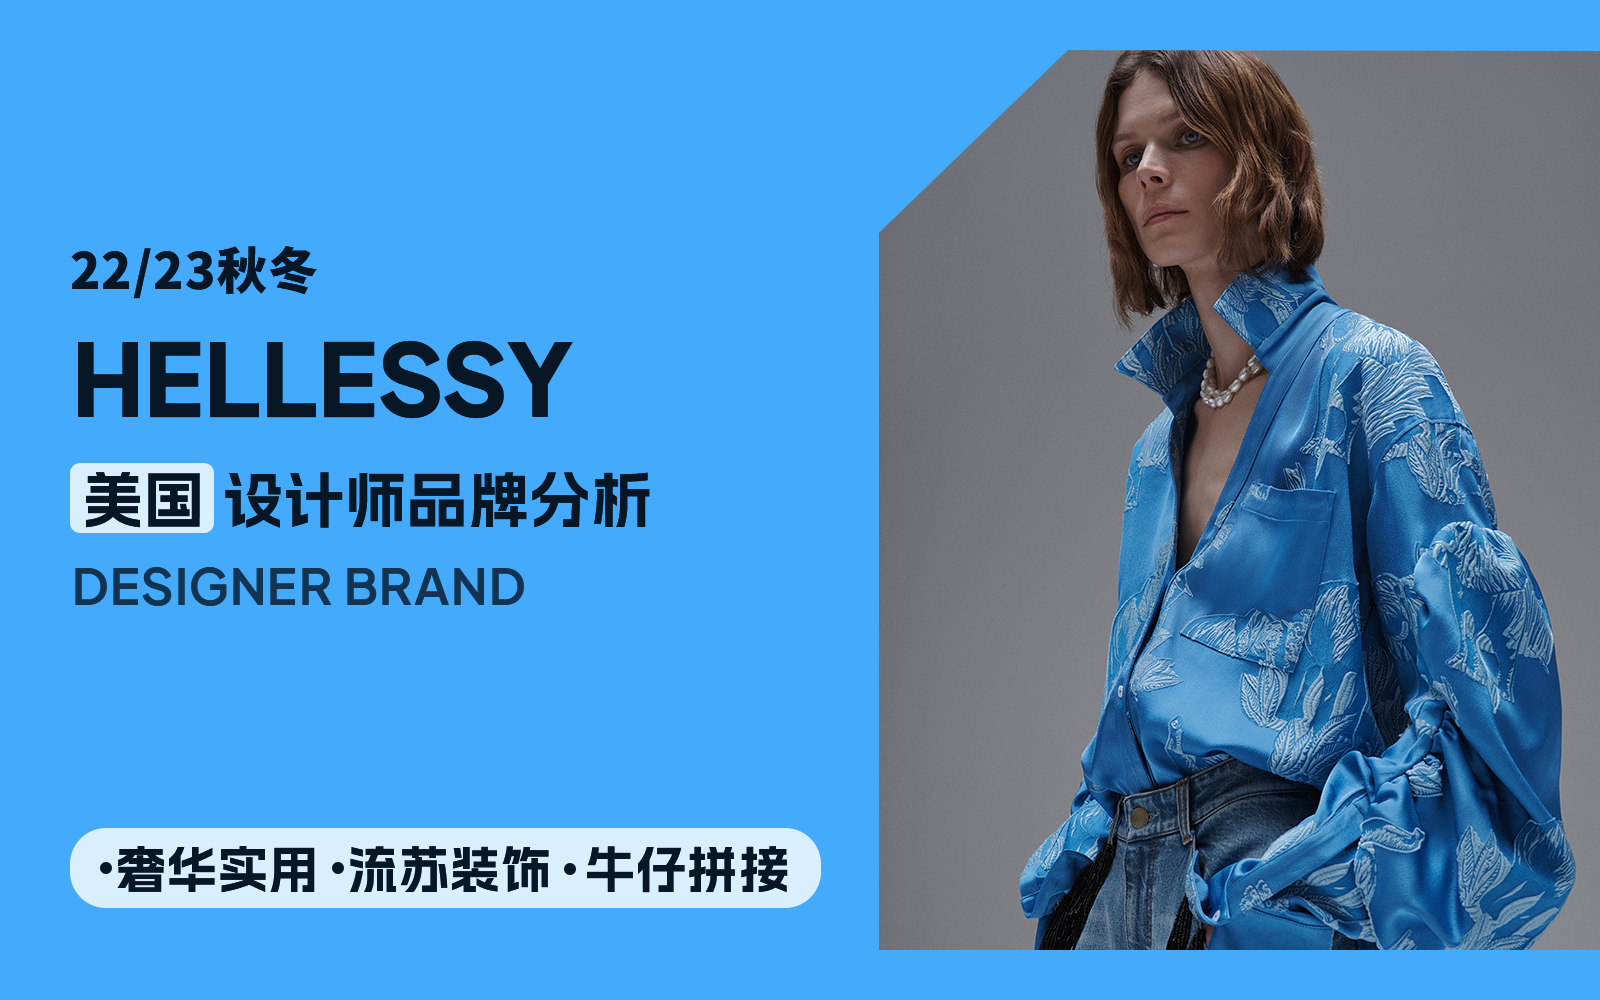 Practical Luxury -- The Analysis of Hellessy The Womenswear Designer Brand